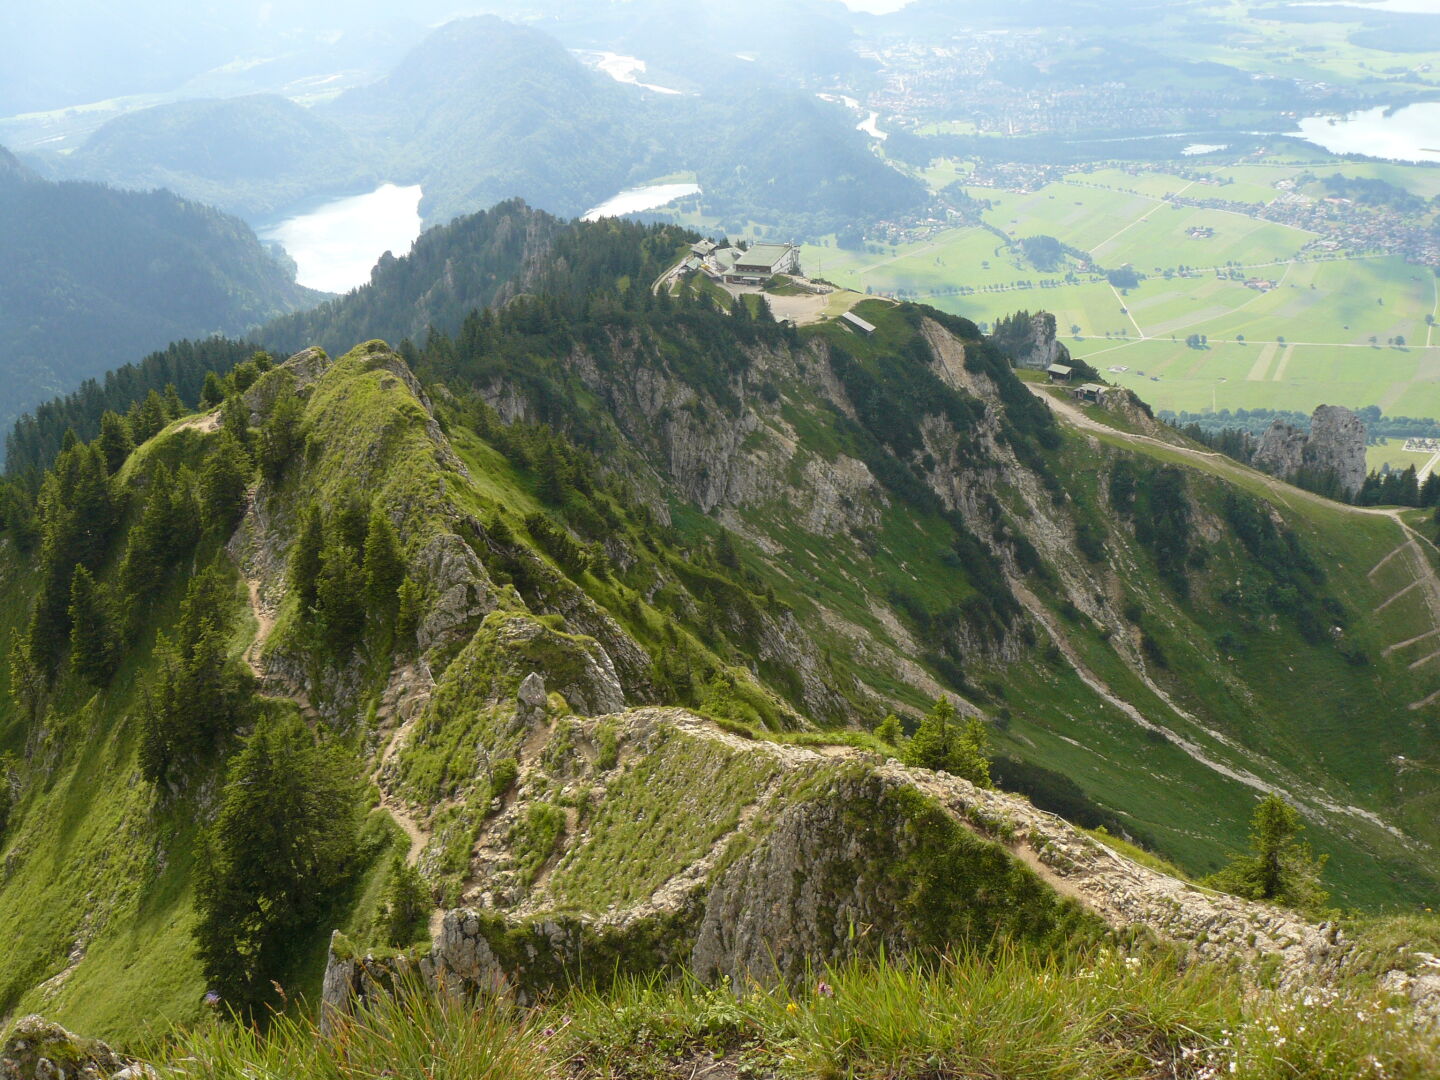 On the peak of the Branderschrofen (1 879 m). In the back, you can see the Tegelberghaus, a mountain hut where I spent the night. And the lakes in the distance on the left are the Alpsee and Schwanensee, between which lies the Castle Hohenschwangau (not visible).